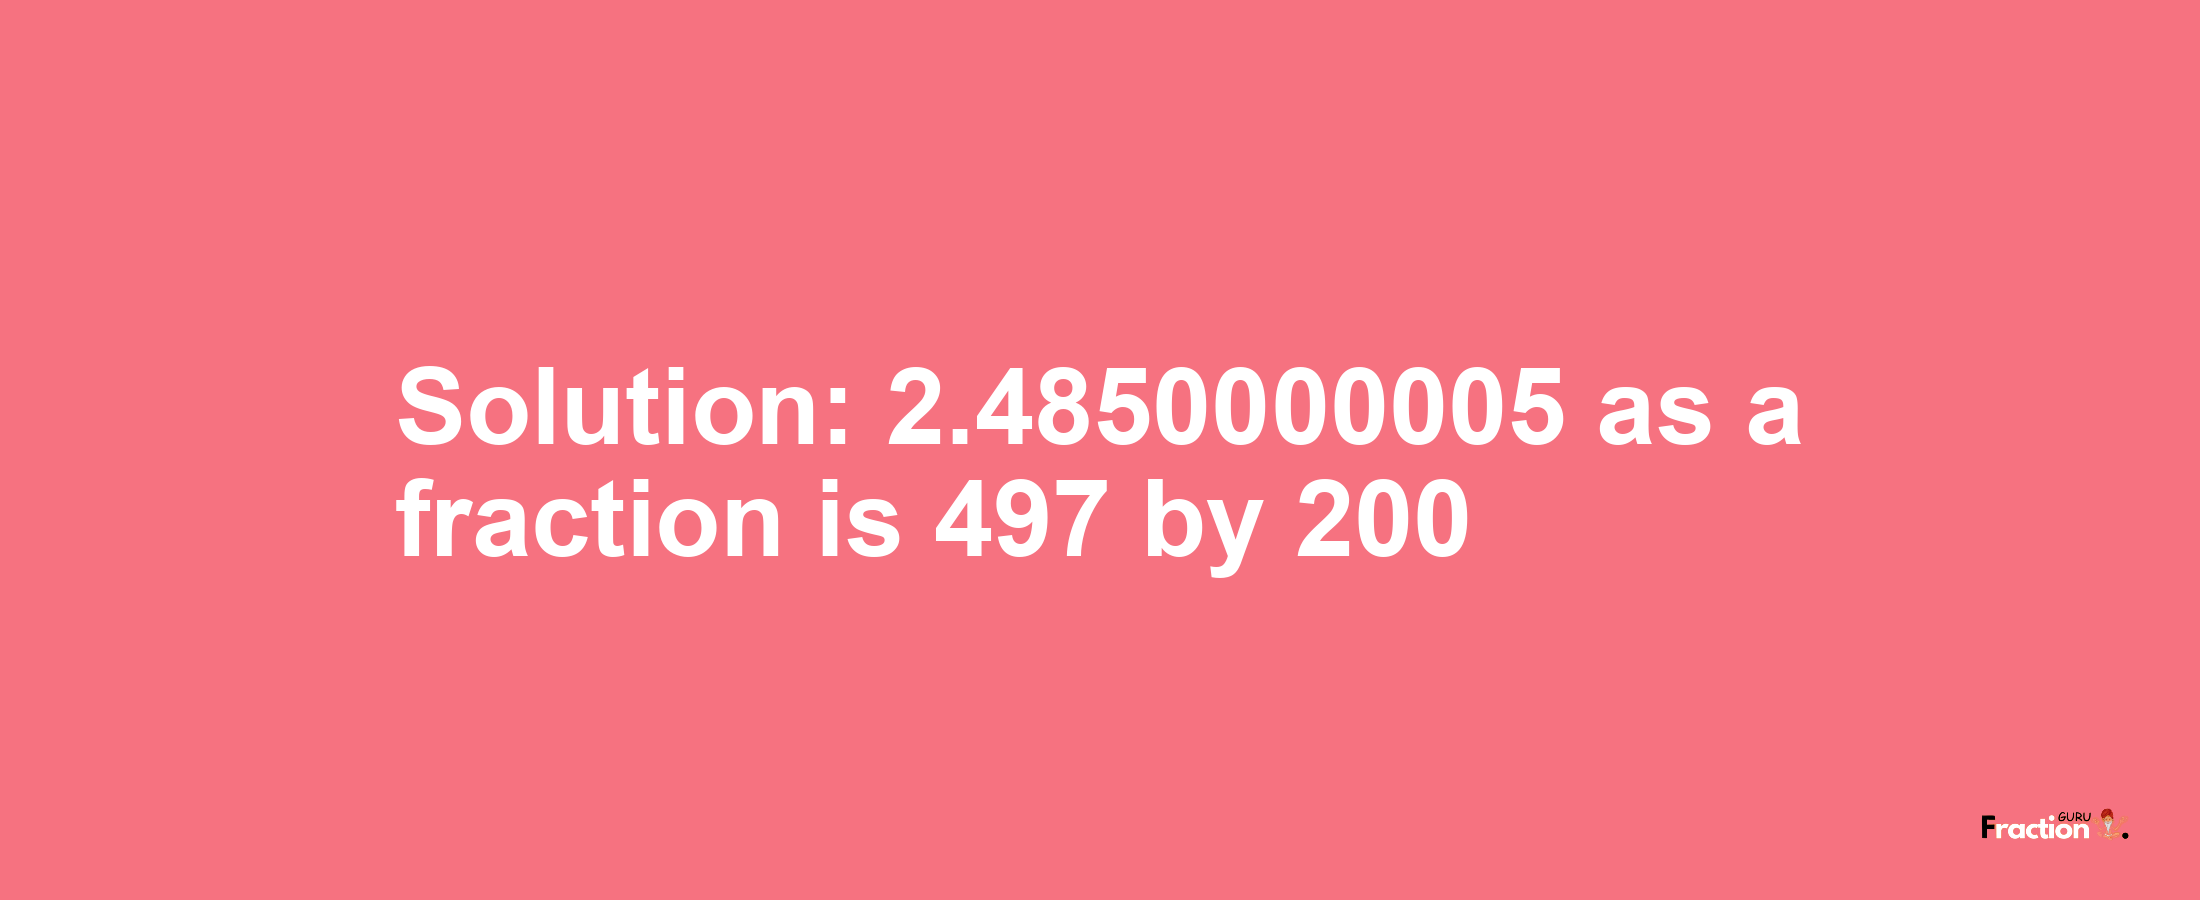 Solution:2.4850000005 as a fraction is 497/200